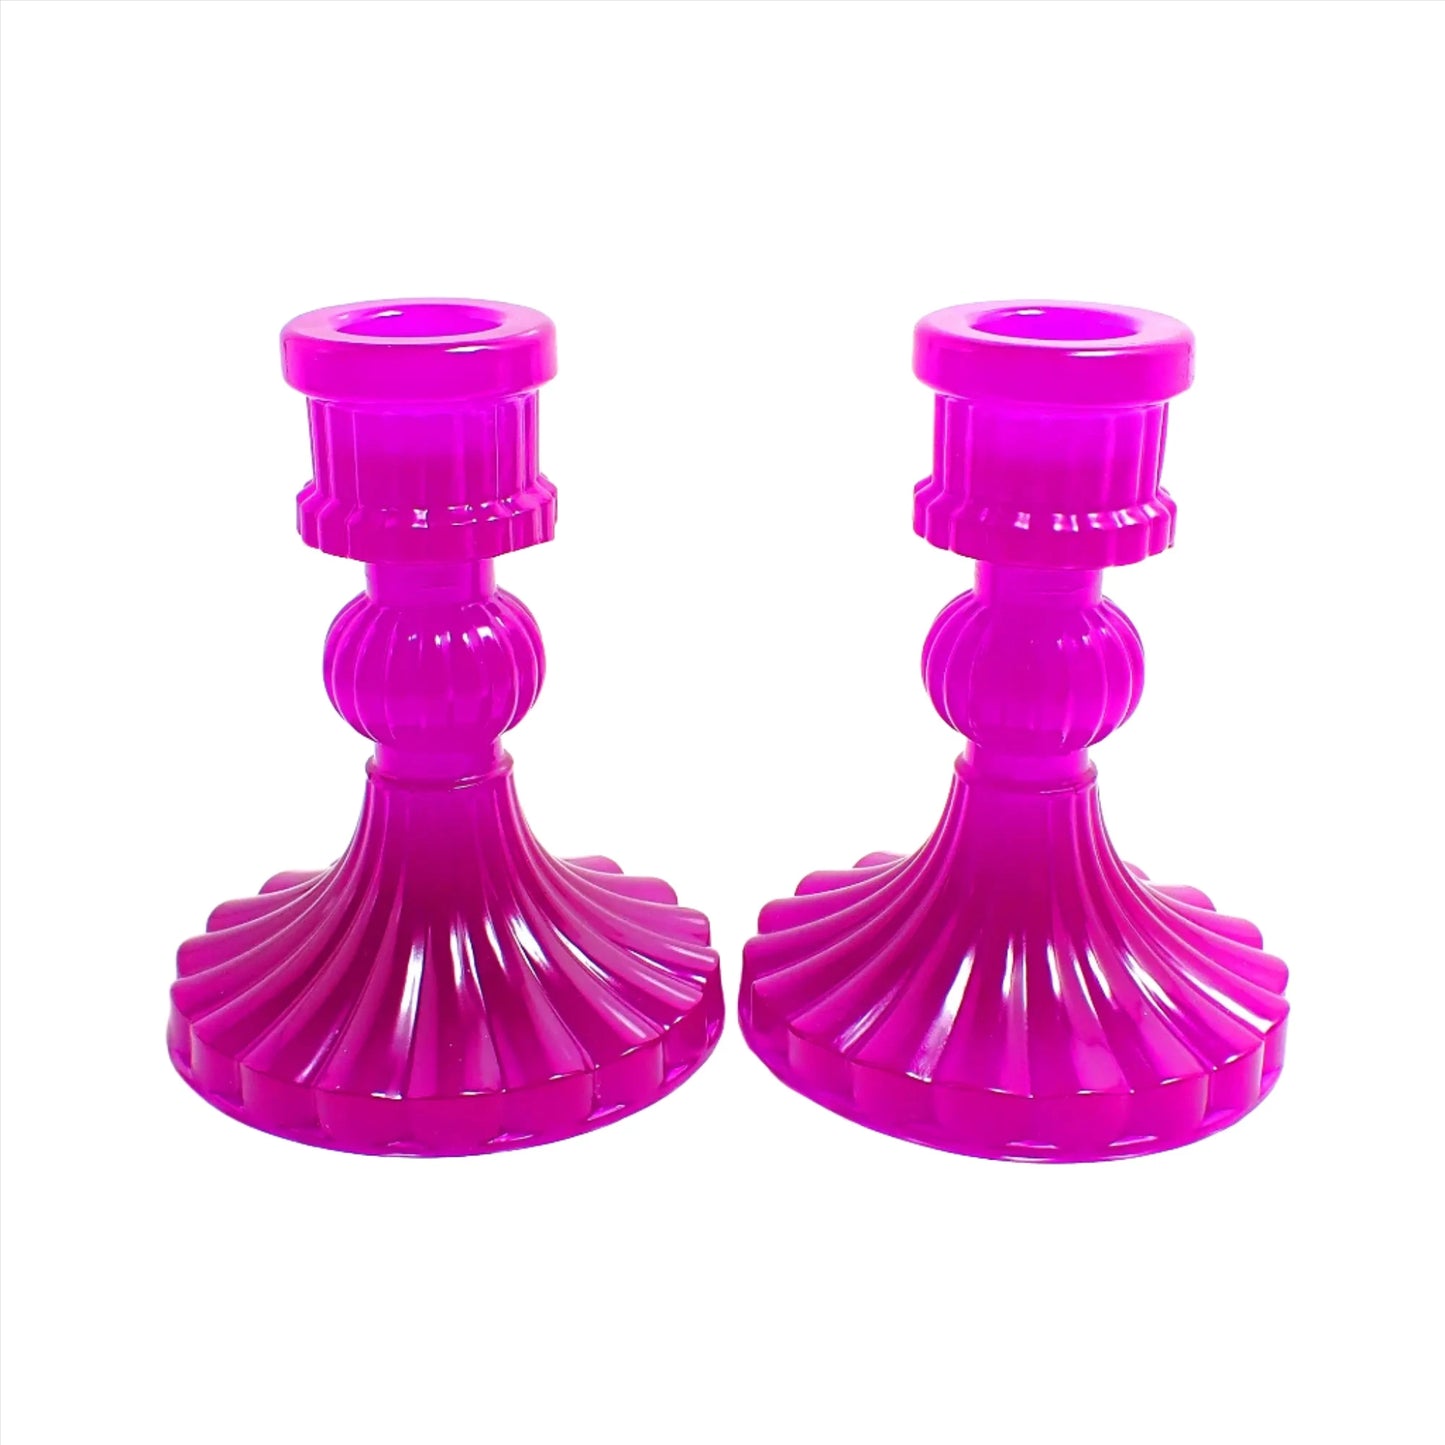 Side view of the vintage style handmade resin candlestick holders. They have a round cylinder style shape at the top, a corrugated round middle, and a flared out bottom with a corrugated ripple design. The resin is neon purple in color. 